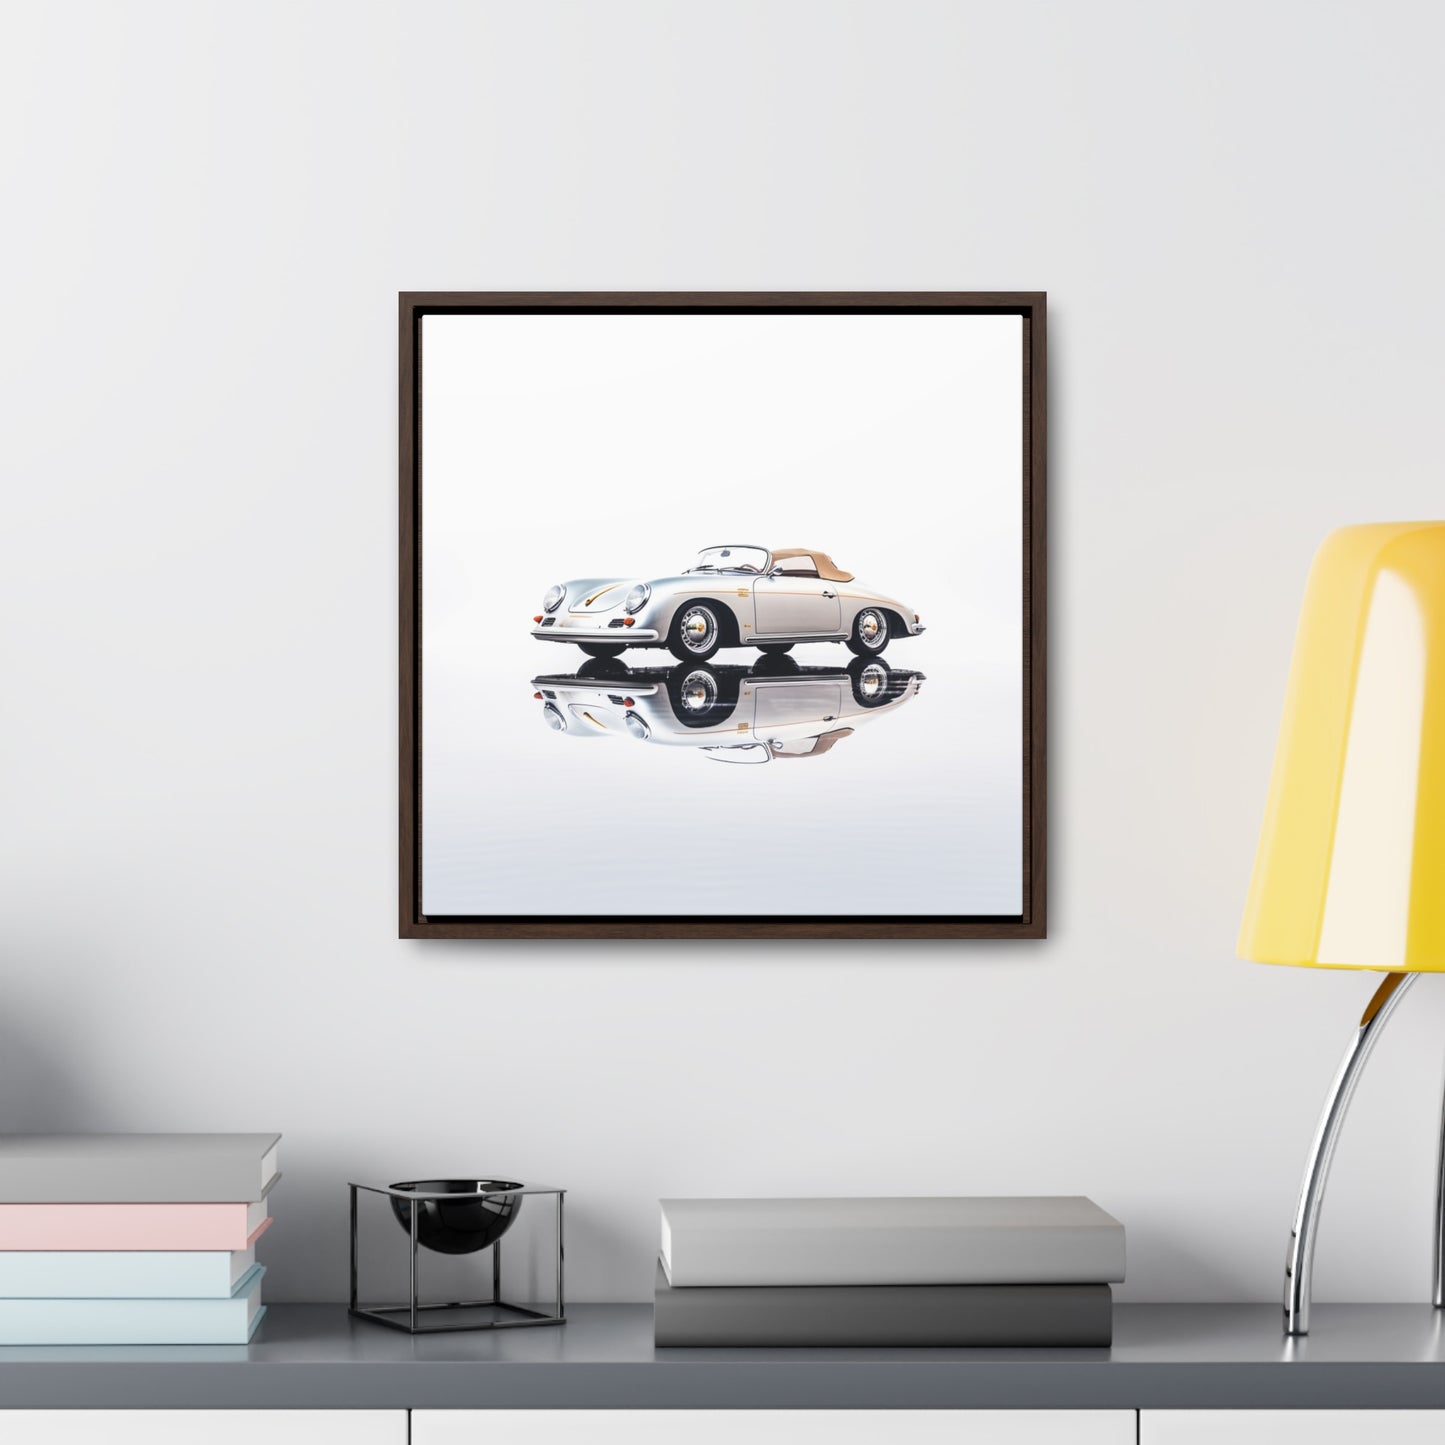 Gallery Canvas Wraps, Square Frame 911 Speedster on water 2